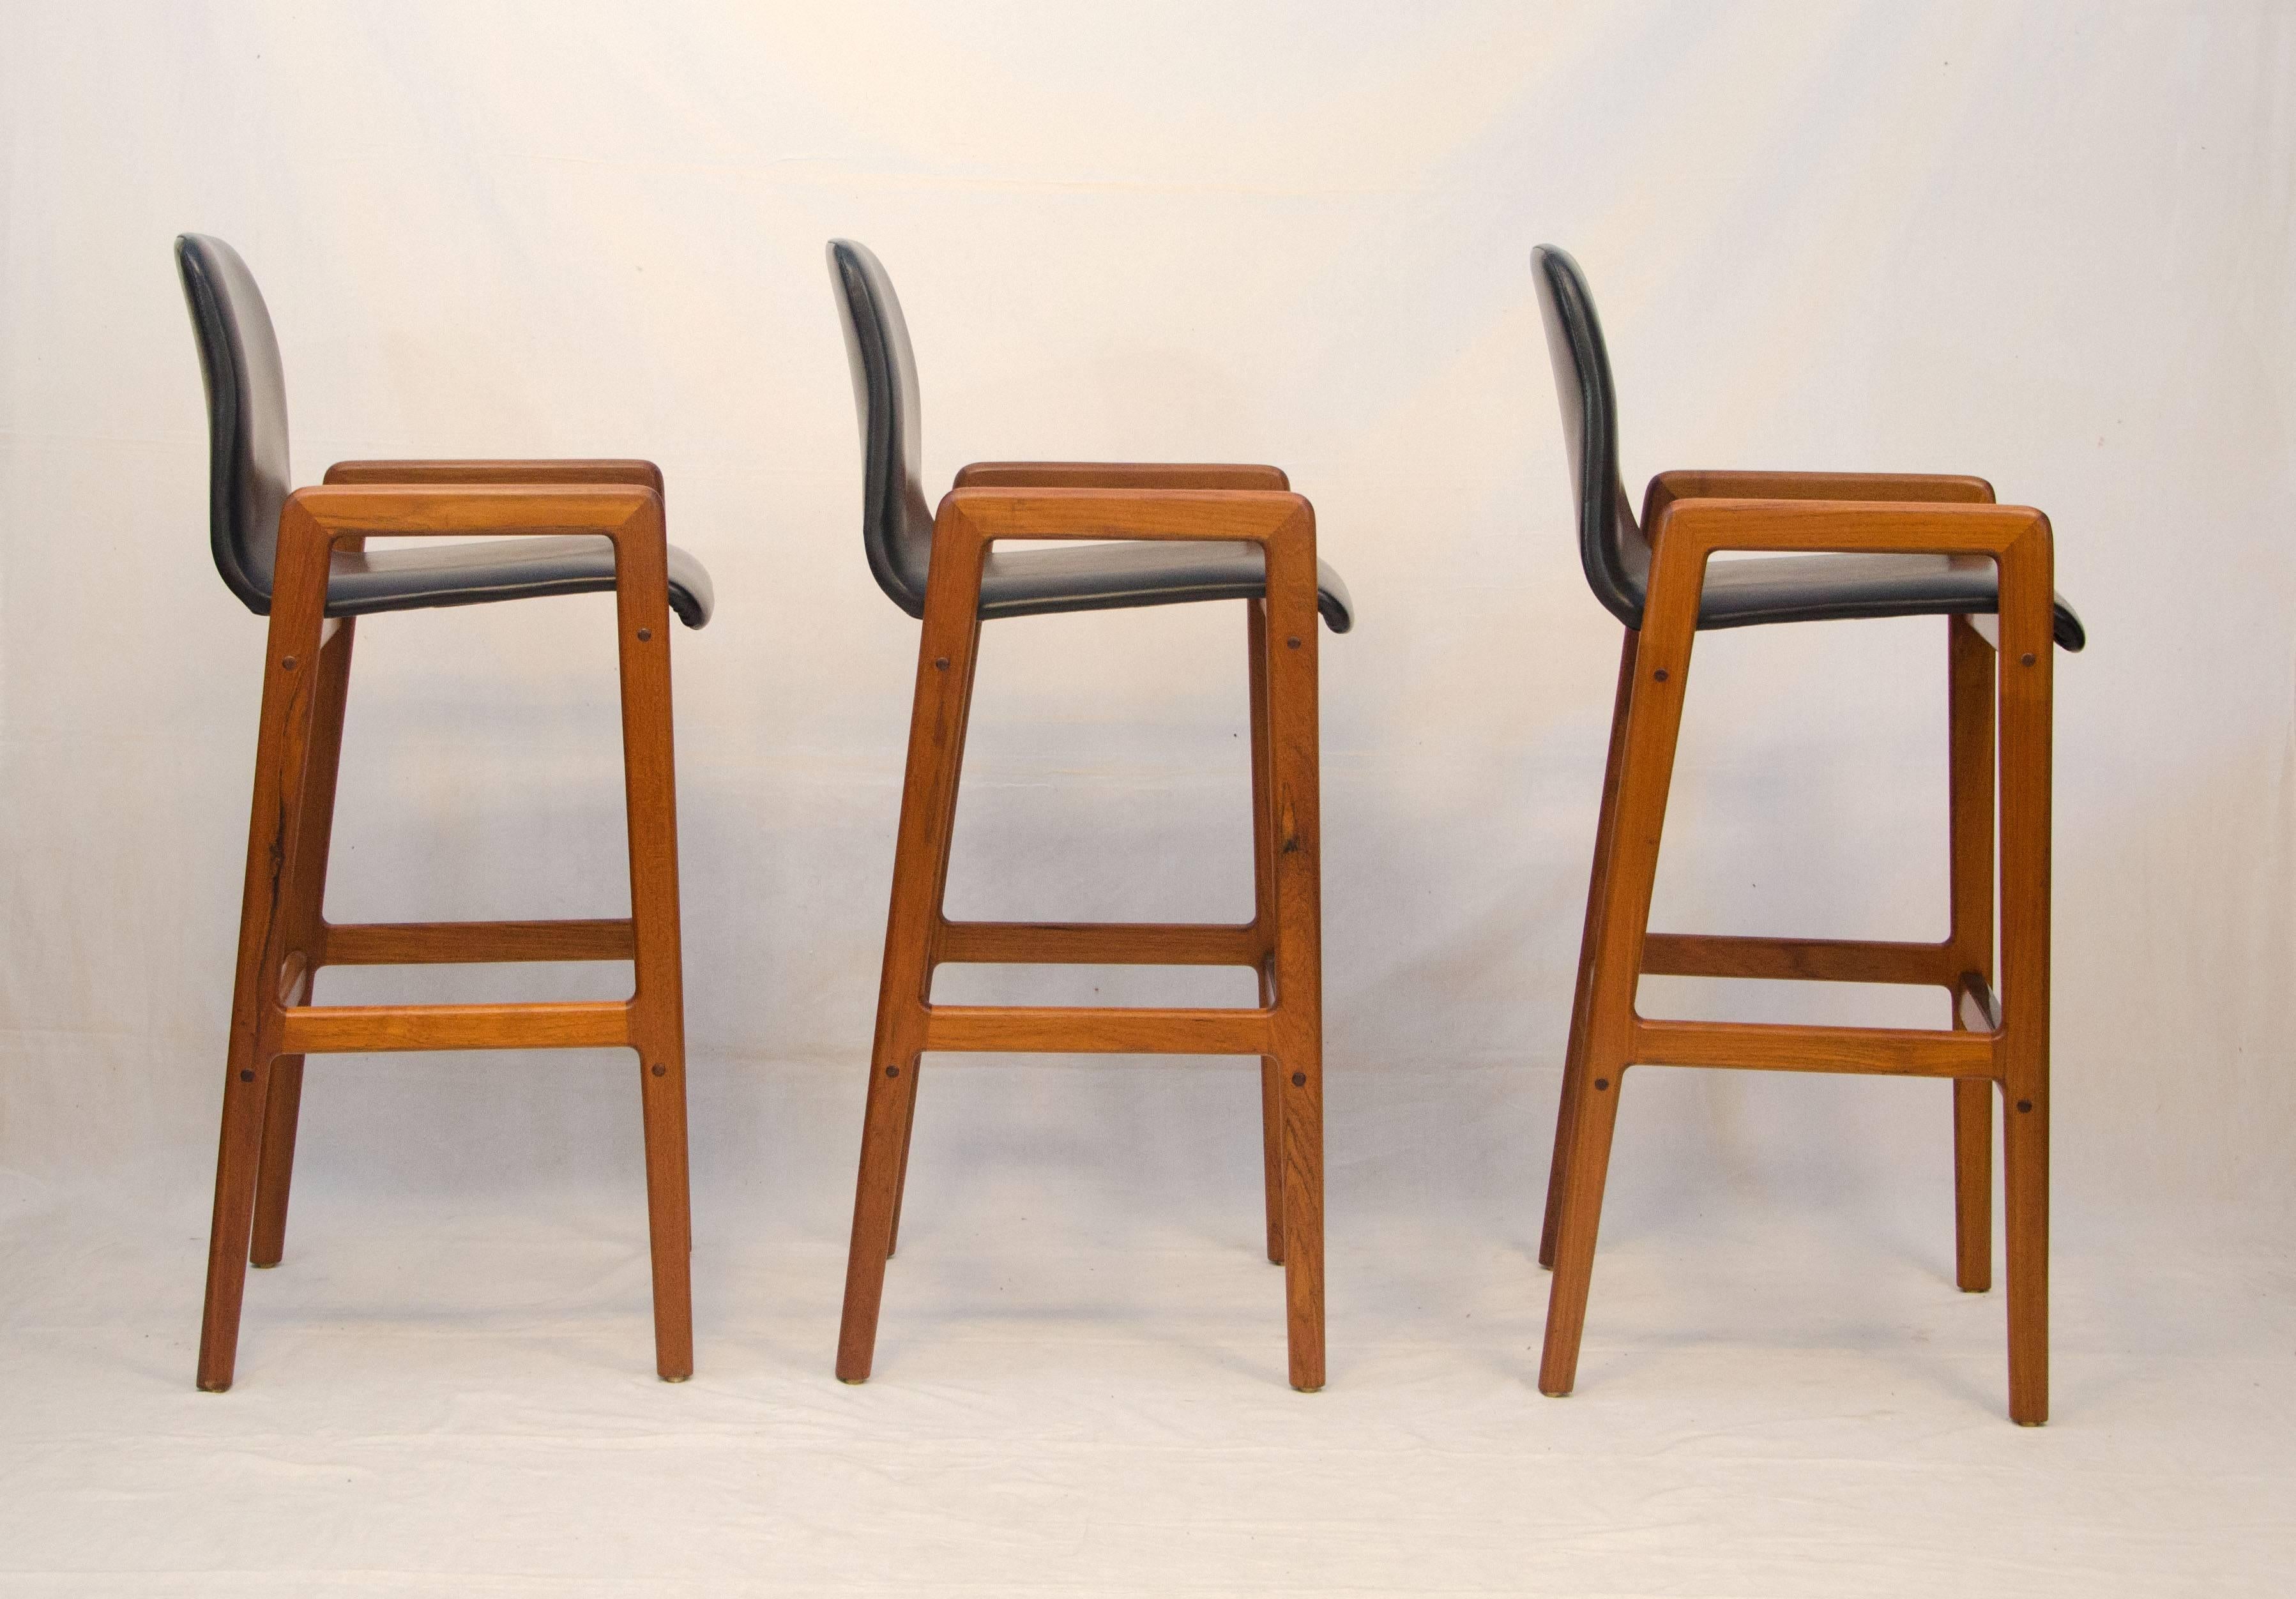 Comfortable Danish teak counter or bar stools. Manufactured tags on seat bottoms: Tarm Stole OG Mobelfabrik. All three foot rests are protected by a formica strip so the wood does not get damaged with use. Seating space between the arms is 17